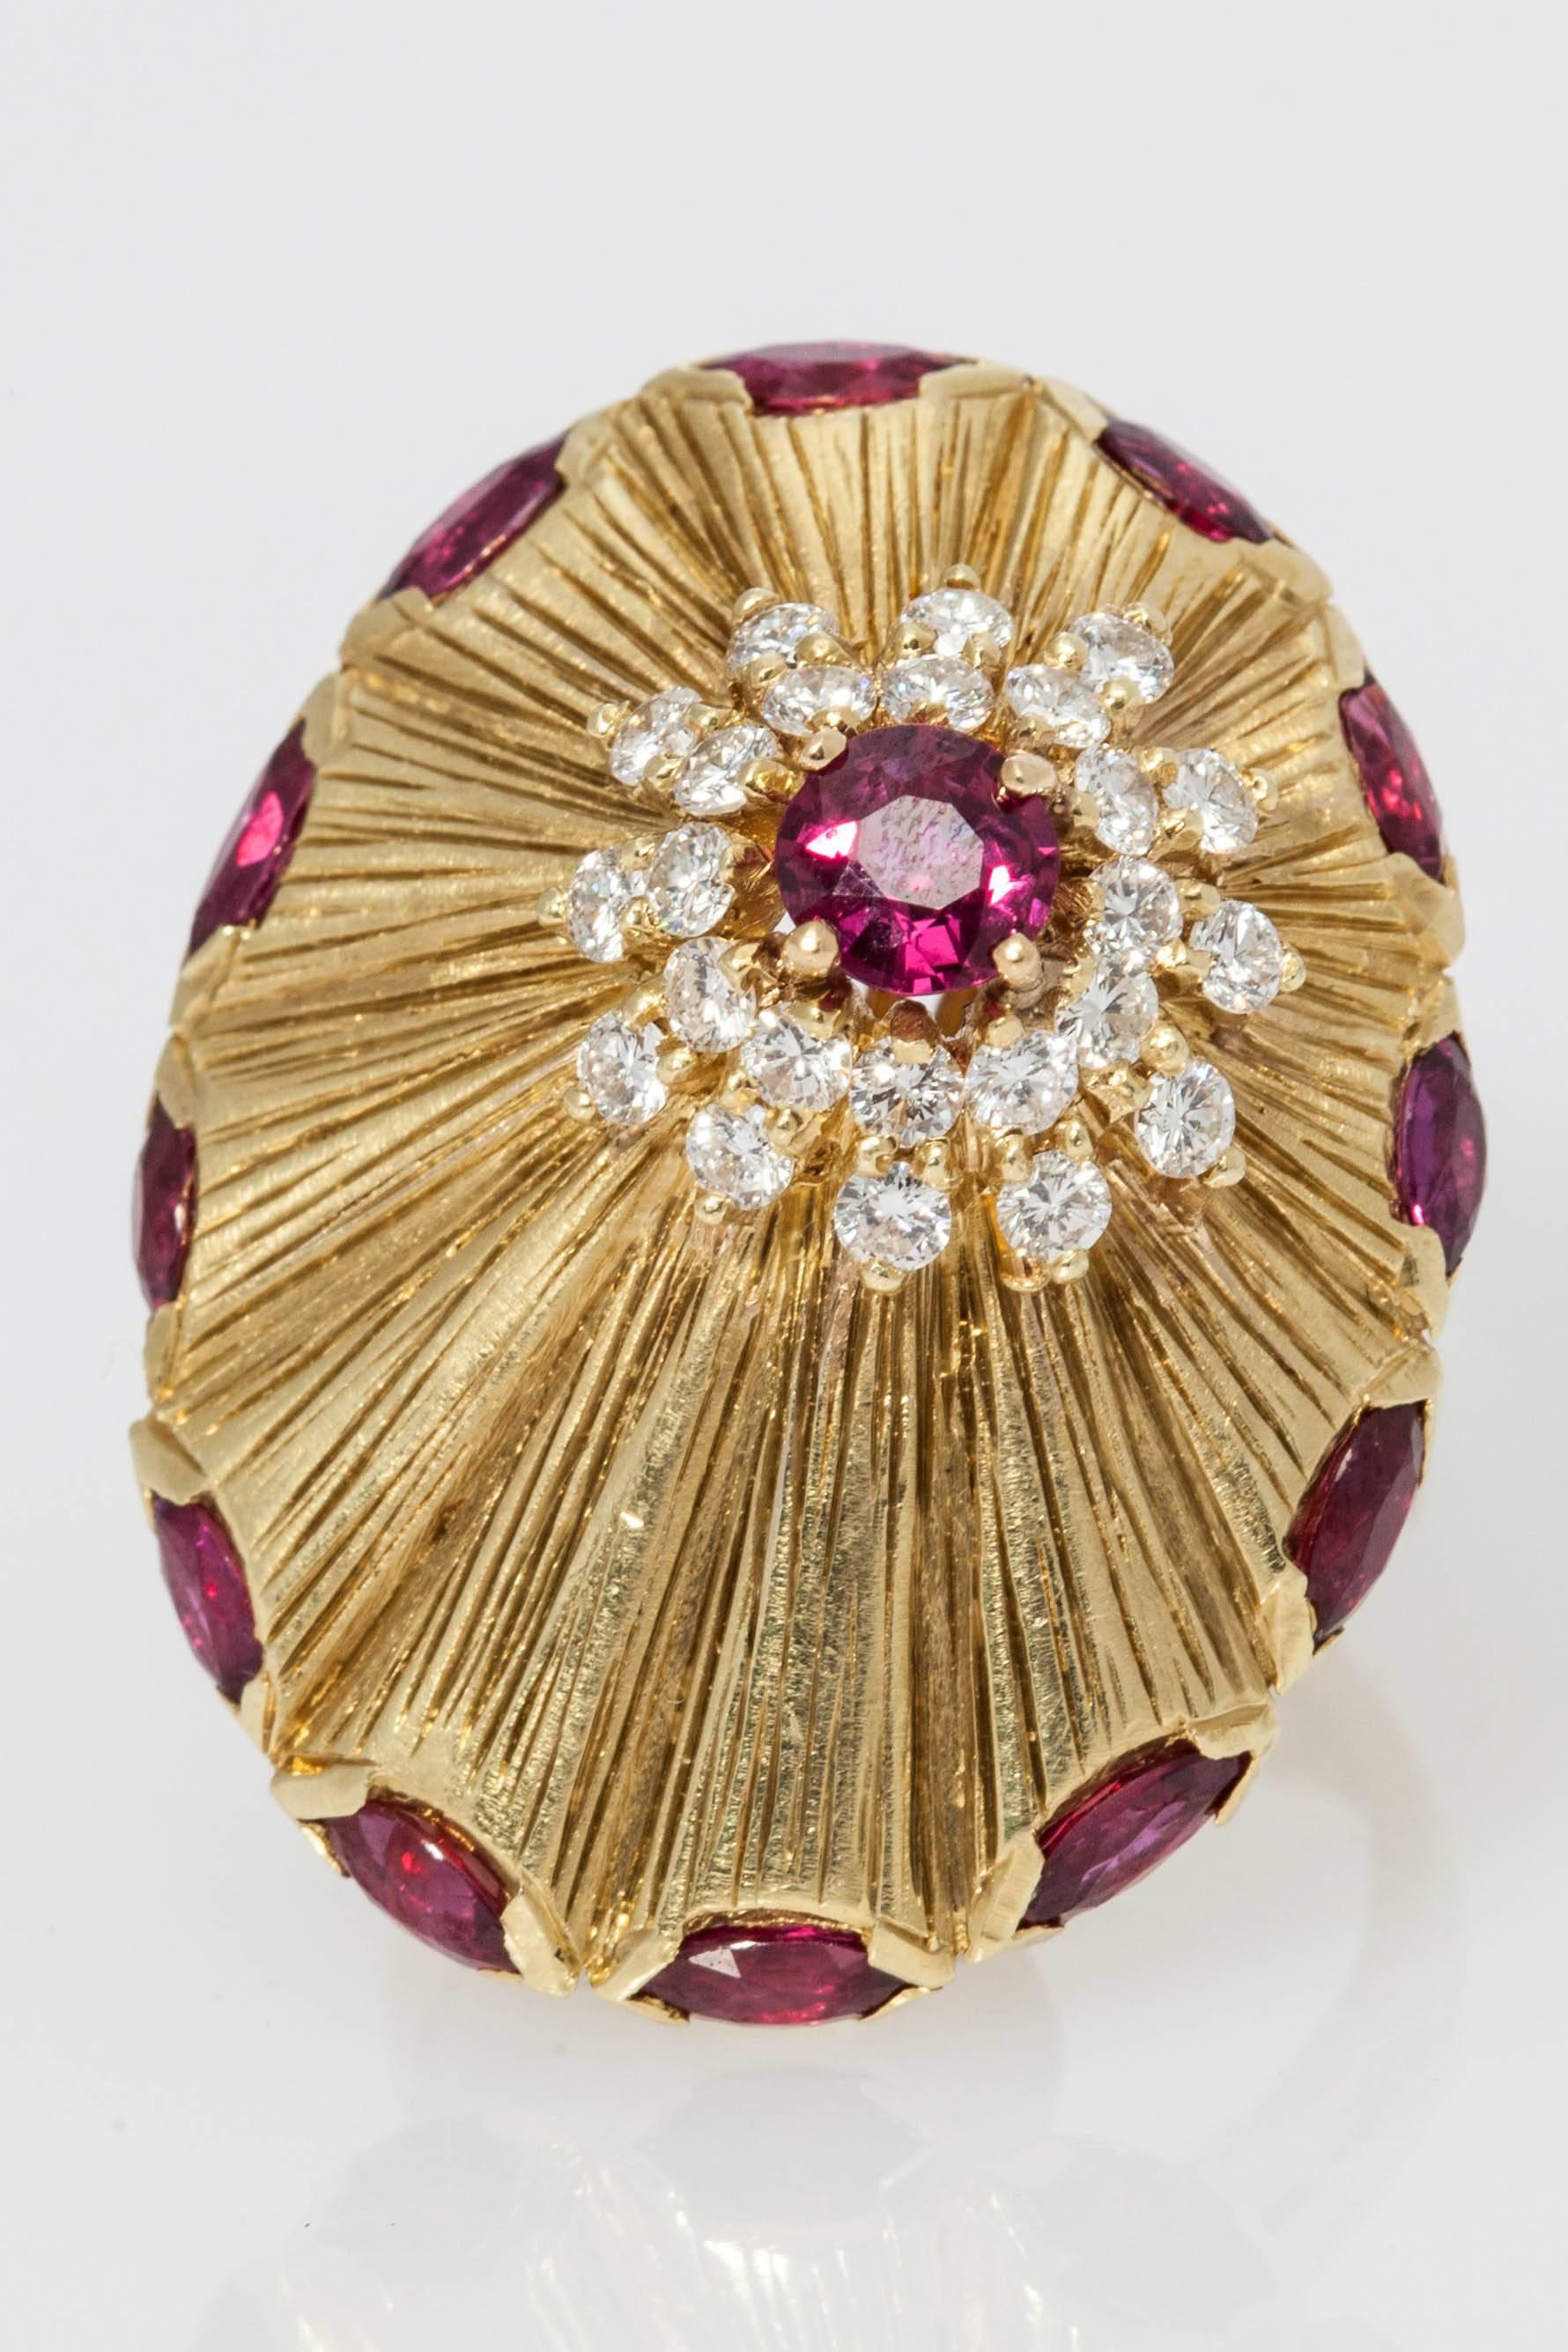 A whimsical and large cocktail ring made in 18kt yellow gold, resembling the shape of a Star-Ship, impeccably crafted highlighted hexagonal cut rubies around its side, as well as on its top (asymmetrically), further enriched with smaller brilliant